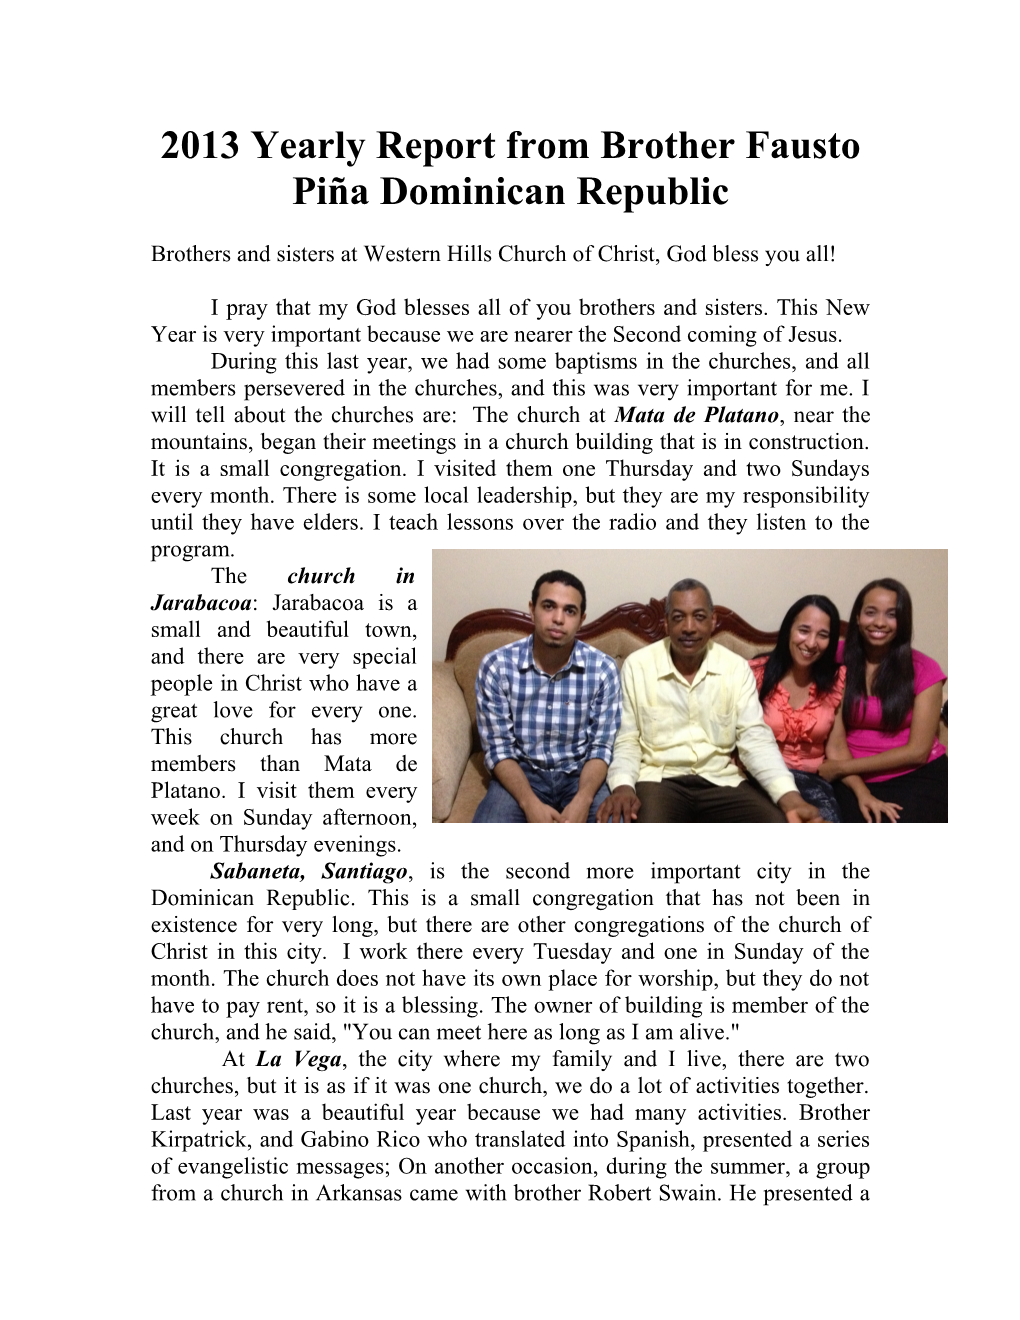 2013 Yearly Report from Brother Fausto Piña Dominican Republic